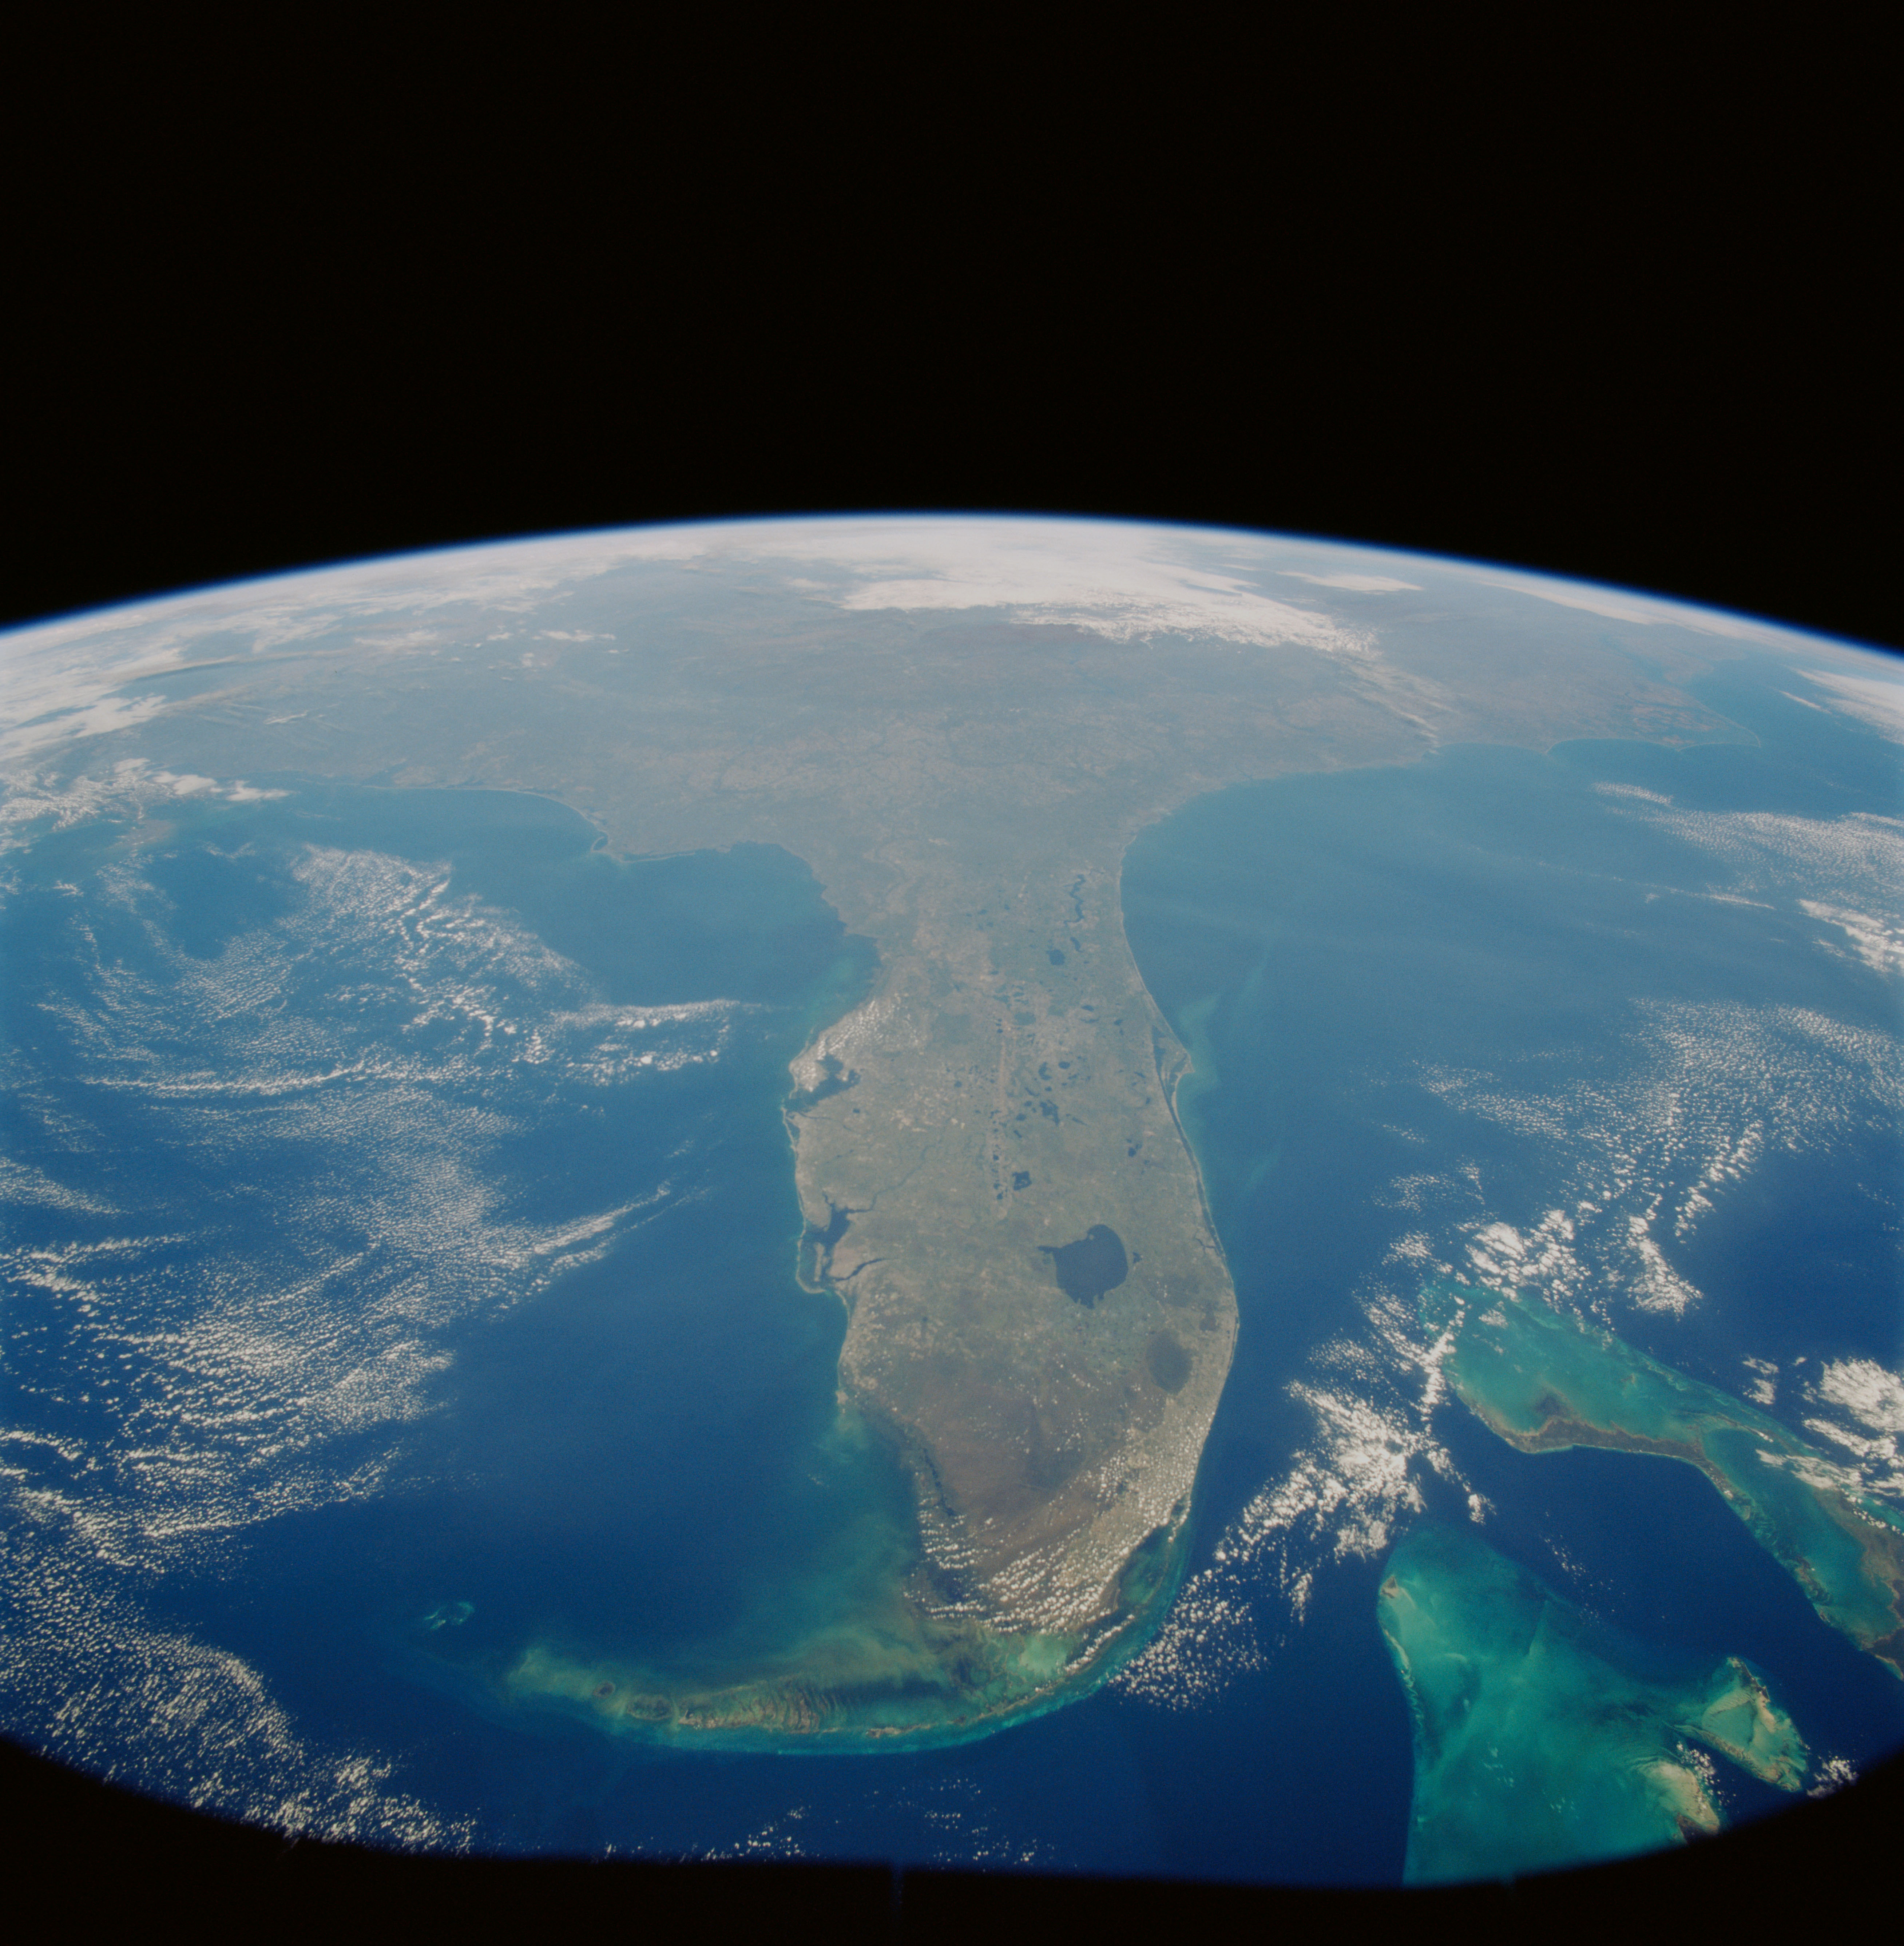 Photograph of Florida taken by the STS-95 crew